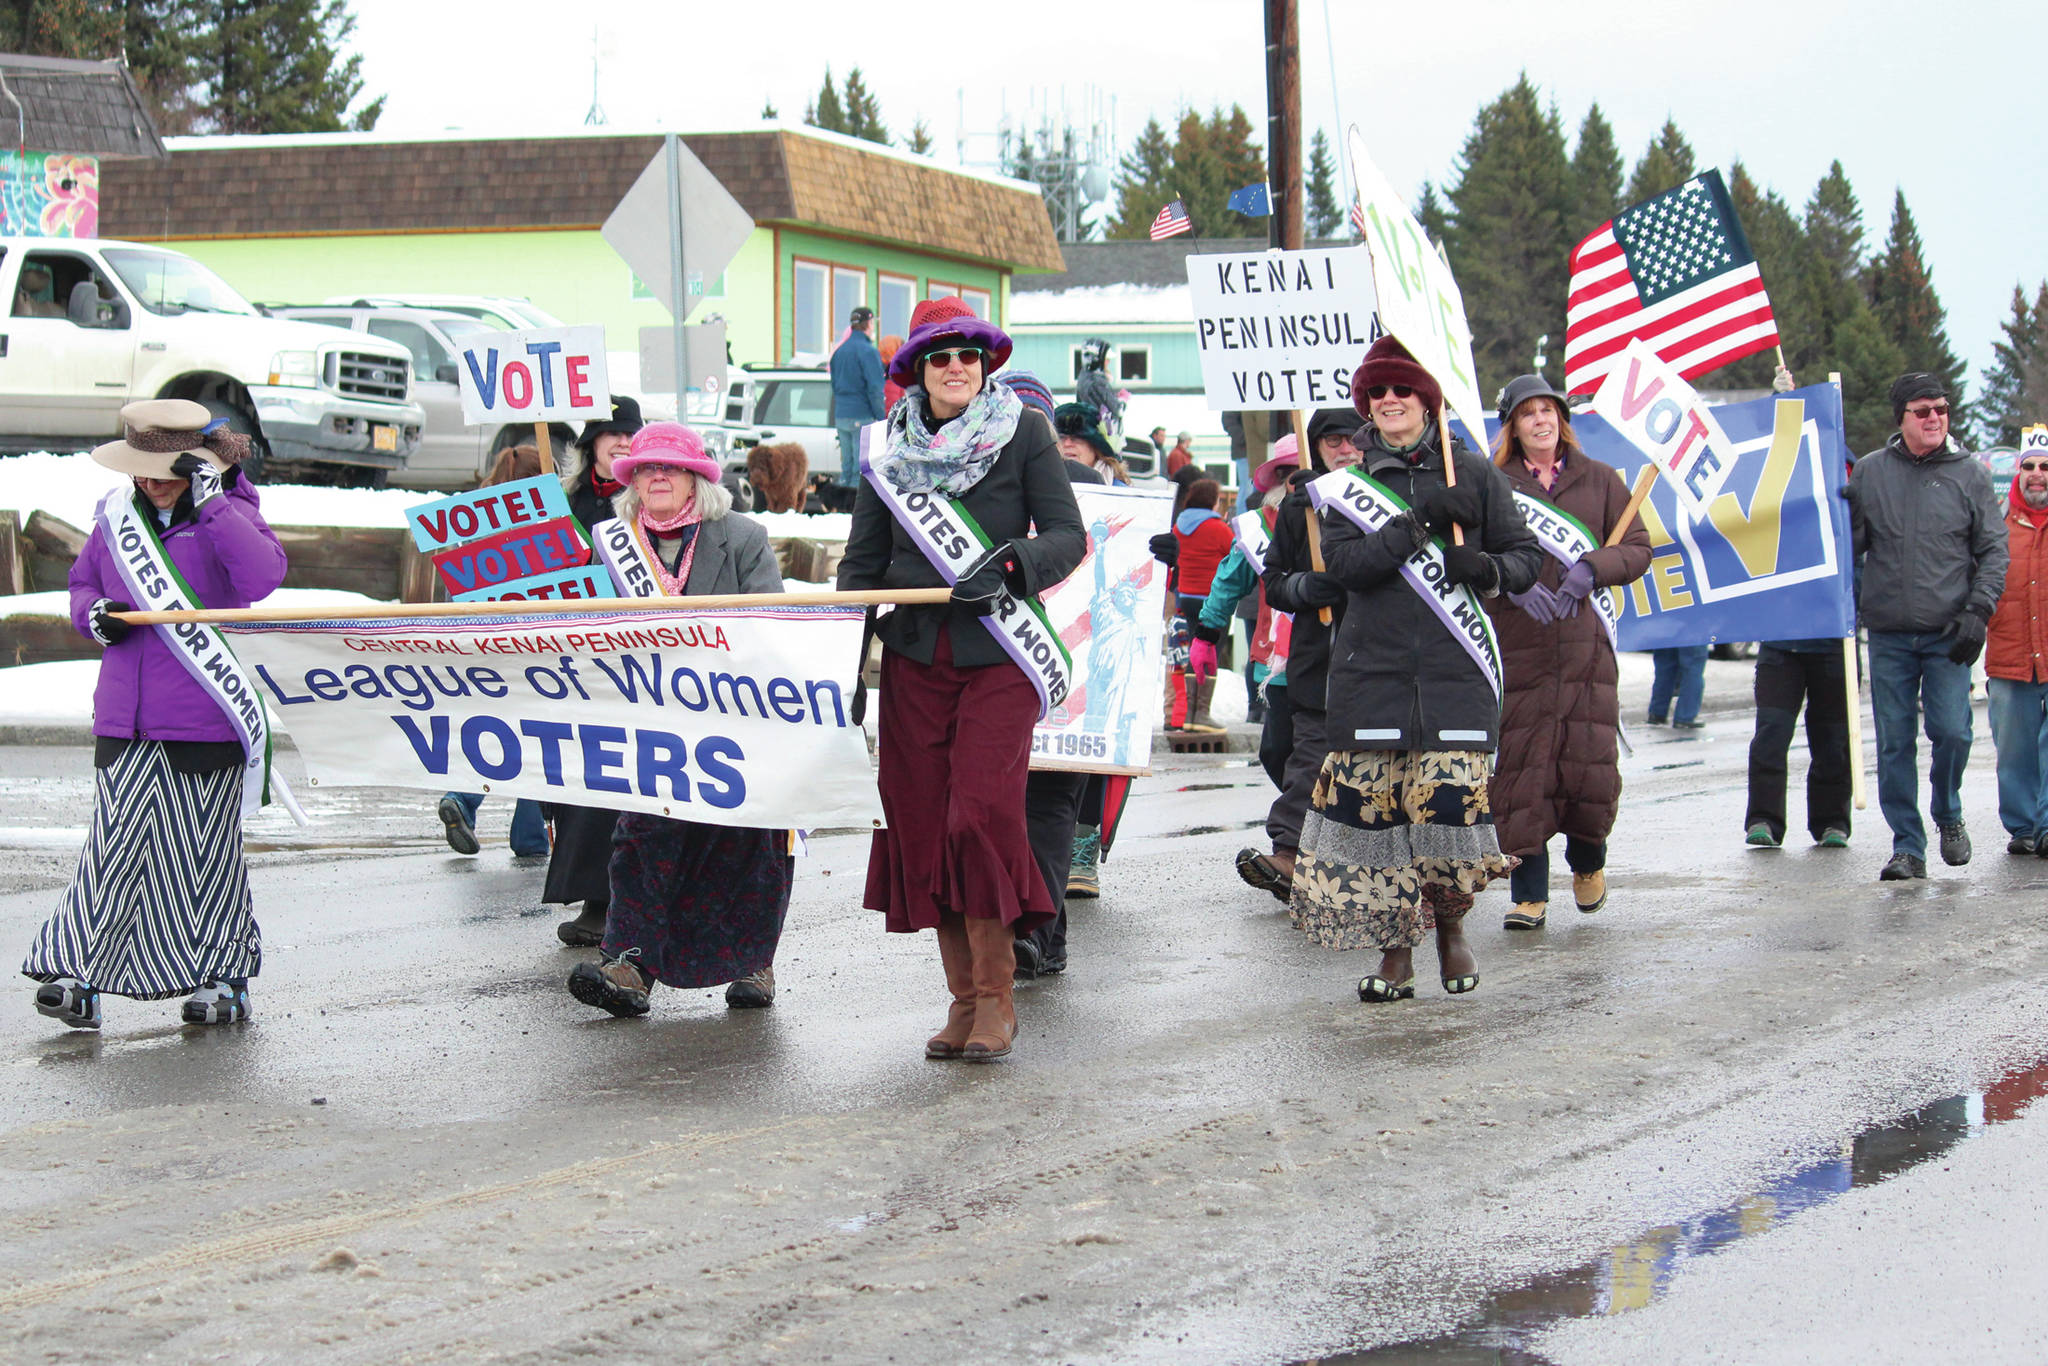 Representatives of the Kenai Peninsula League of Women Voters, based on the central peninsula, walk in this year’s Homer Winter Carnival Parade on Saturday, Feb. 8, 2020 on Pioneer Avenue in Homer, Alaska. (Photo by Megan Pacer/Homer News)